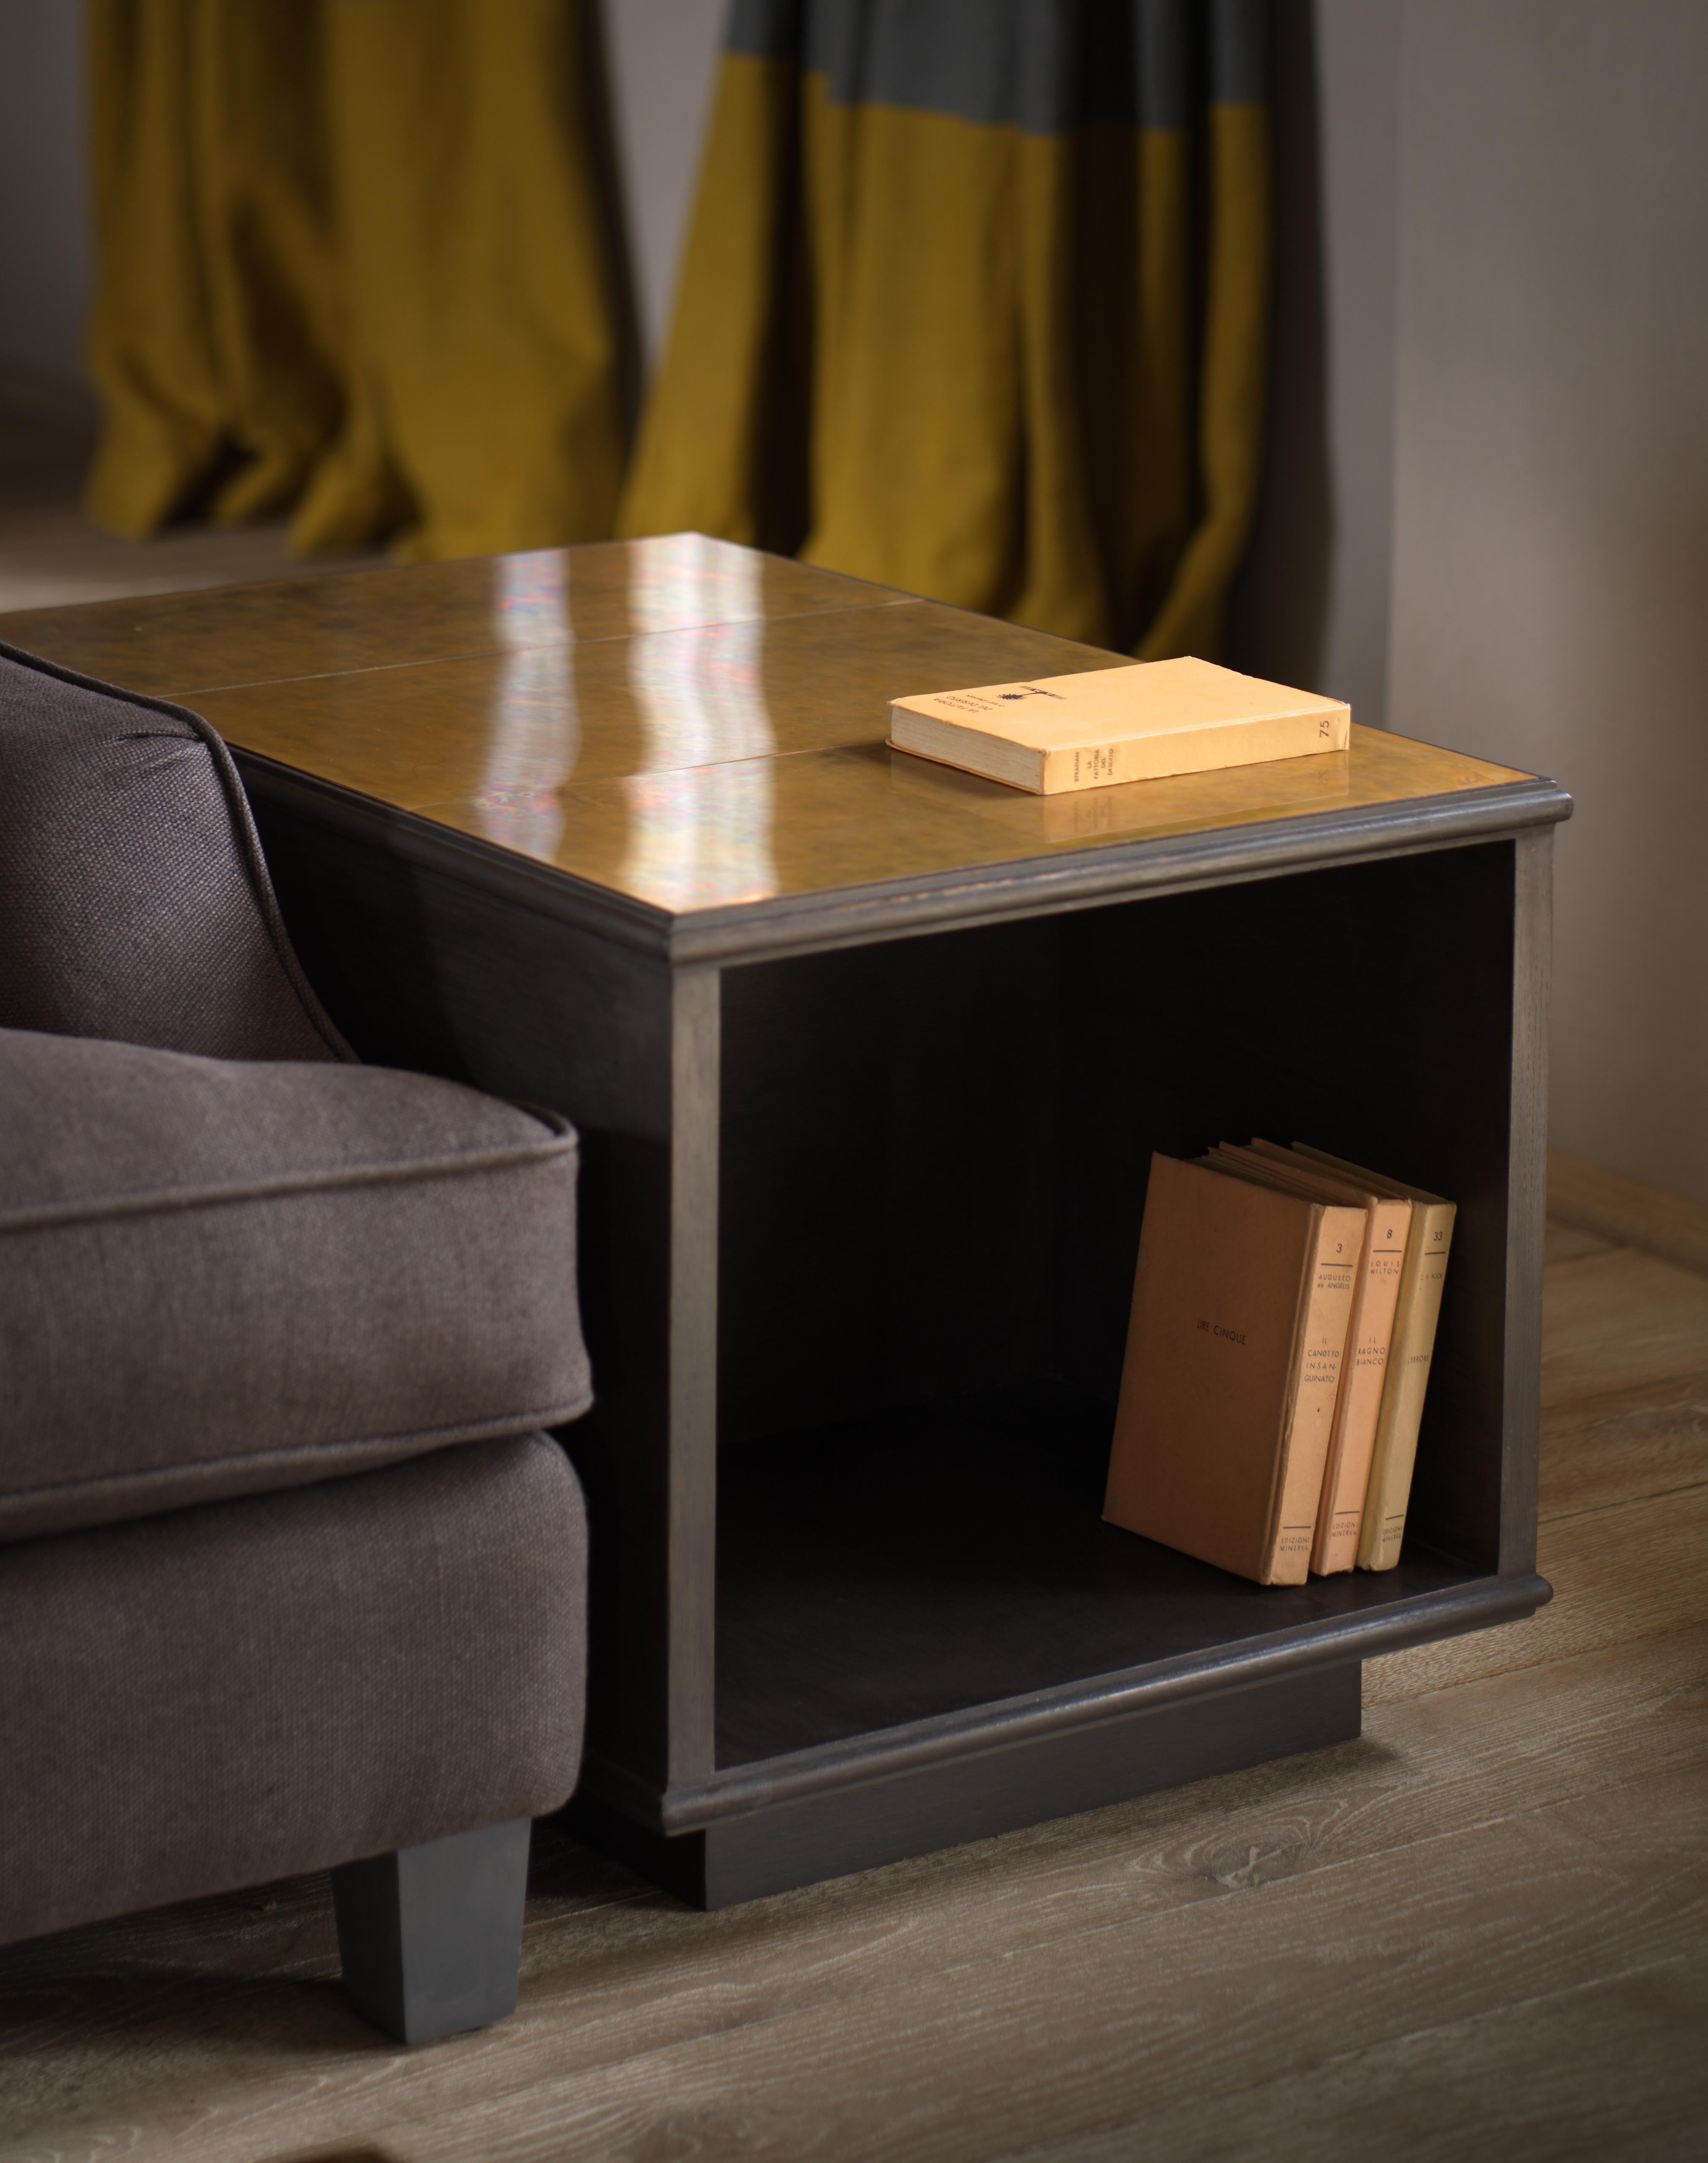 The modernist lamp table, an ebonized oak and patinated bronze mounted lamp table / bookcase
B.B. - lamp tables are always a bit of a nightmare. I find combining it with a bookcase often solves the problem. Constructed from solid oak, not a